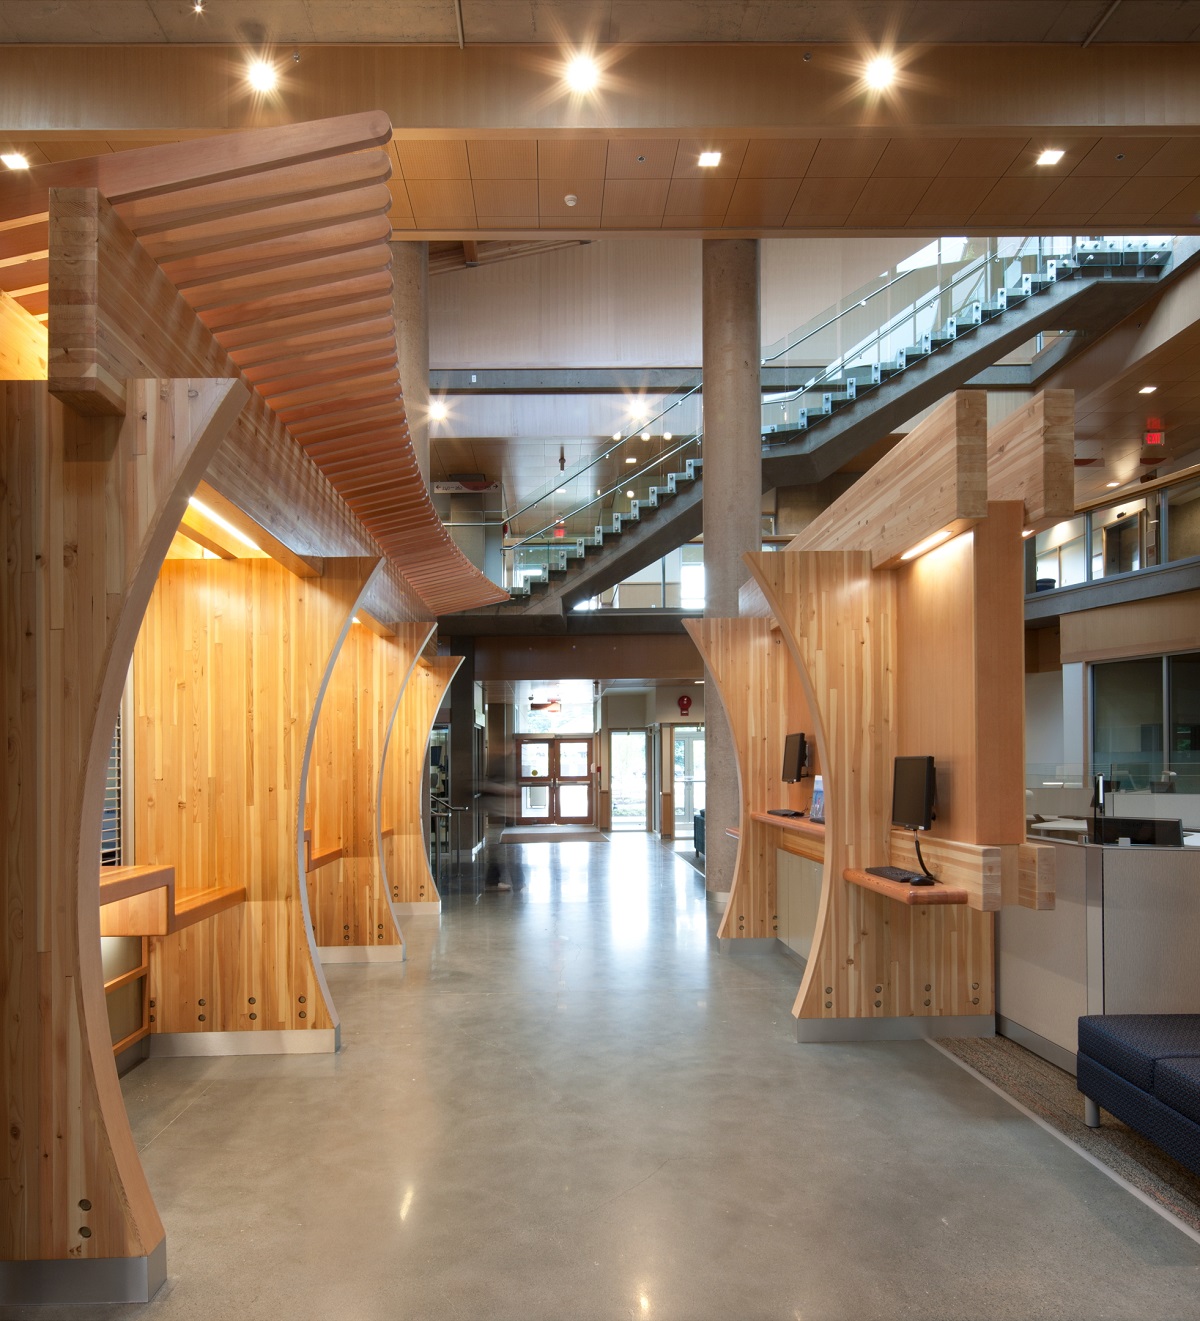 glue-laminated timber (Glulam) beams and decorative workstation dividers, wood trim, and decorative wood elements are all shown in this daytime interior image of the multi storey Vancouver Island University Cowichan Campus main entrance and atrium